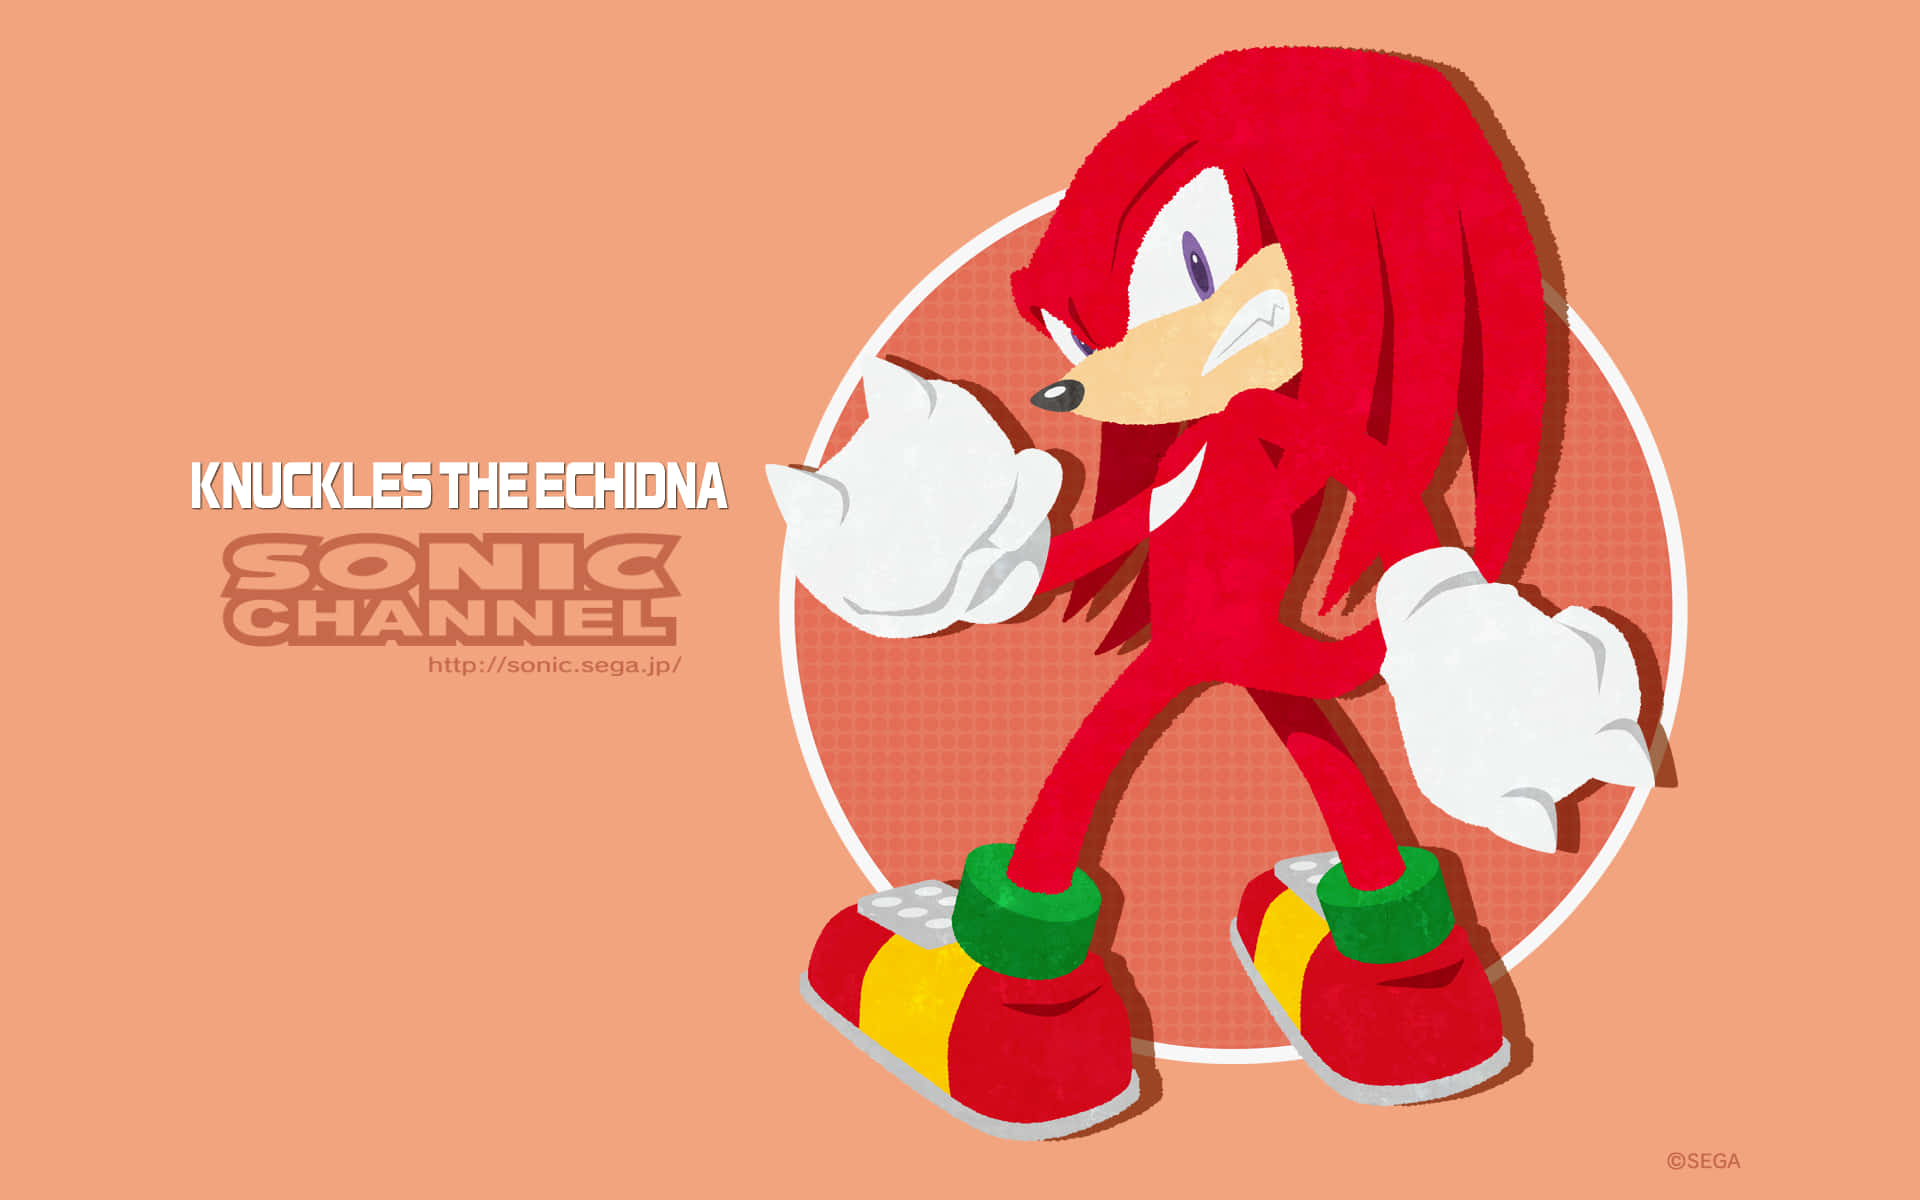 Knuckled From Sonic The Hedgehog Series Wallpaper